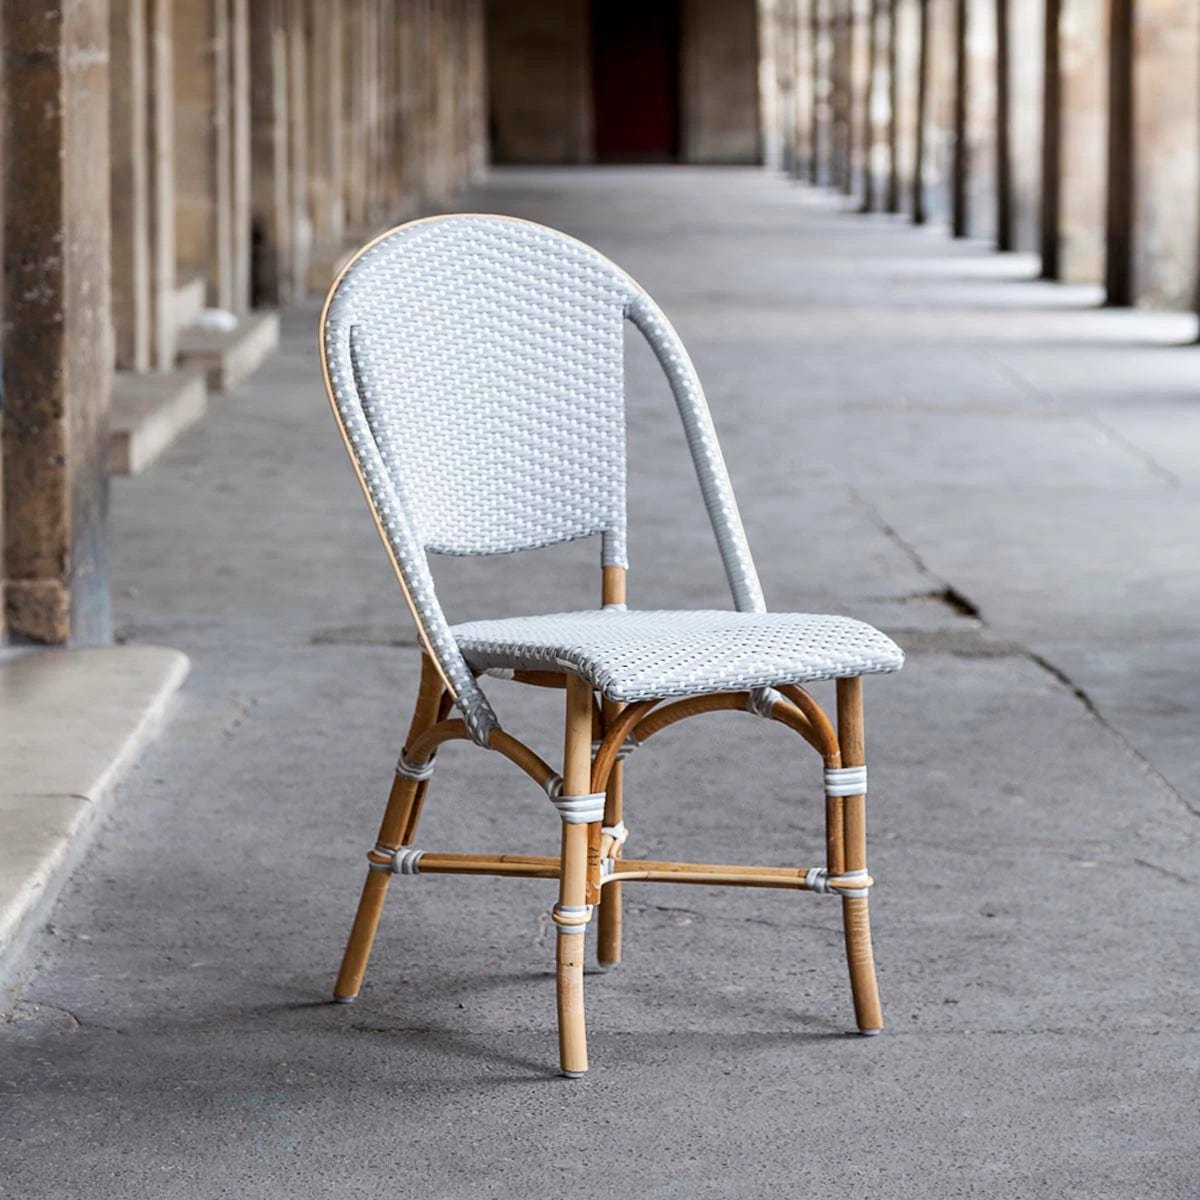 Sika Design Sofie Chair Furniture